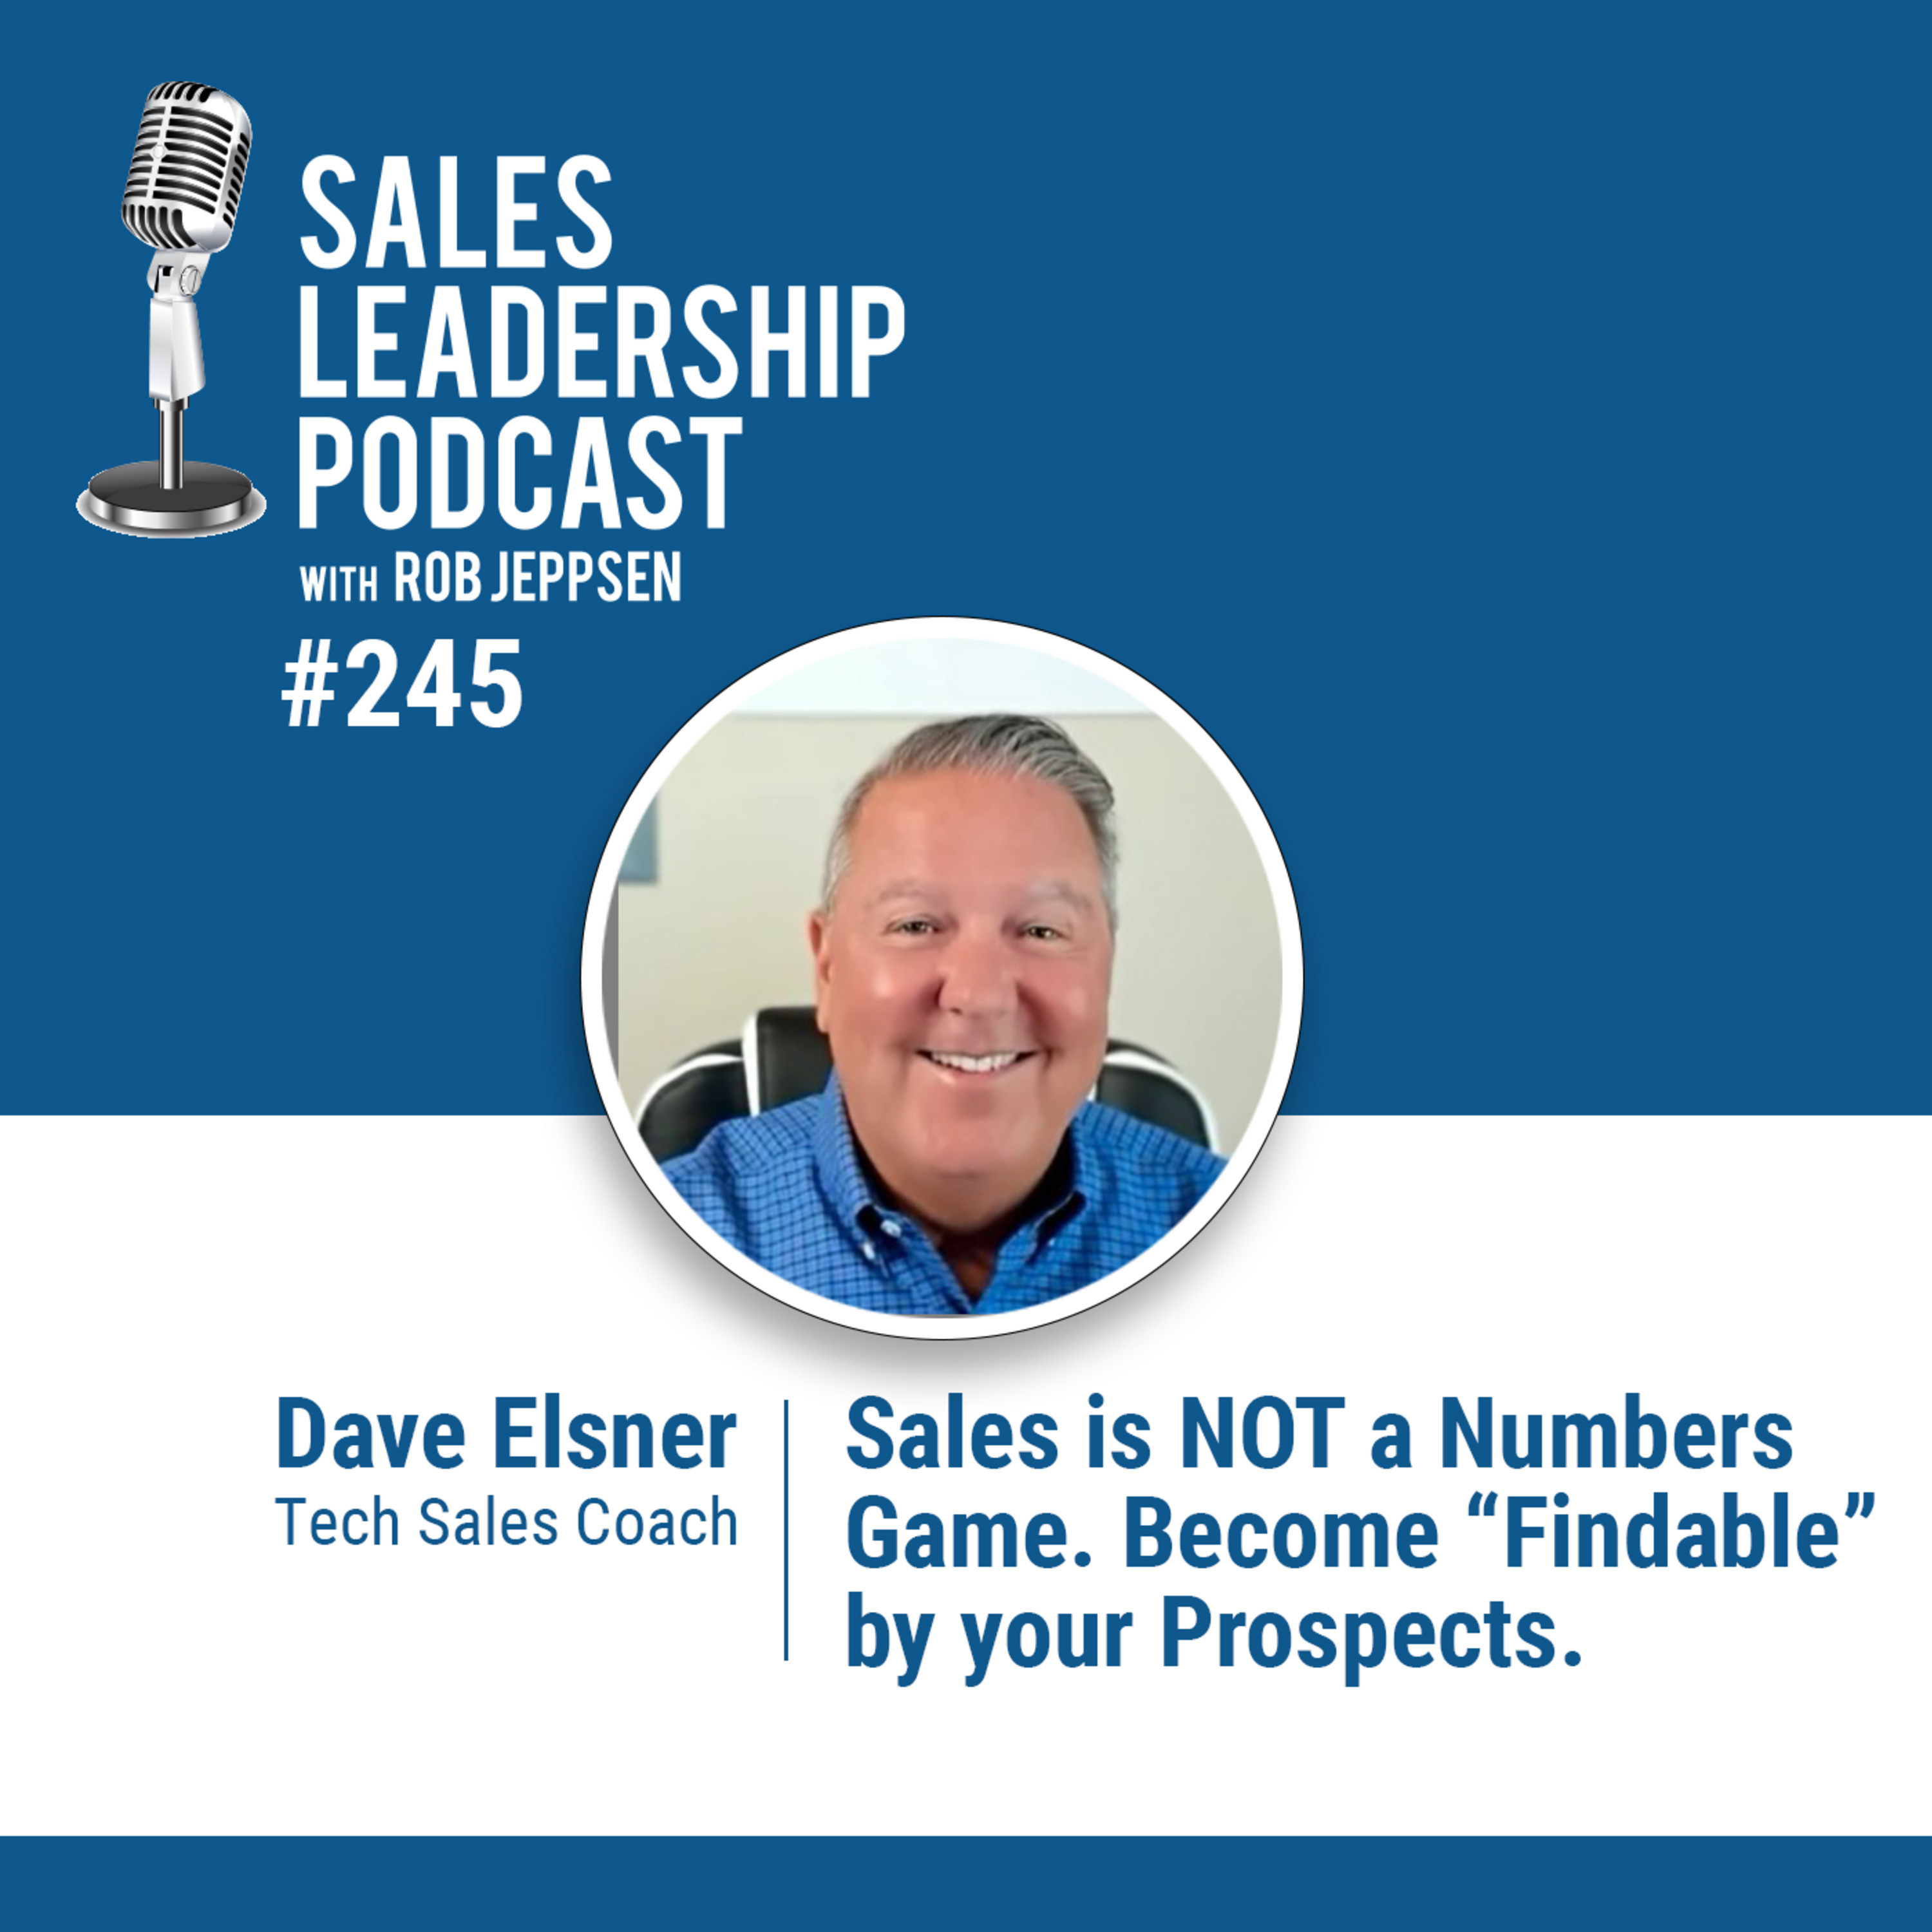 Episode 245: Dave Elsner, Sales Coach: Sales is NOT a Numbers Game. Become “Findable” by your Prospects.